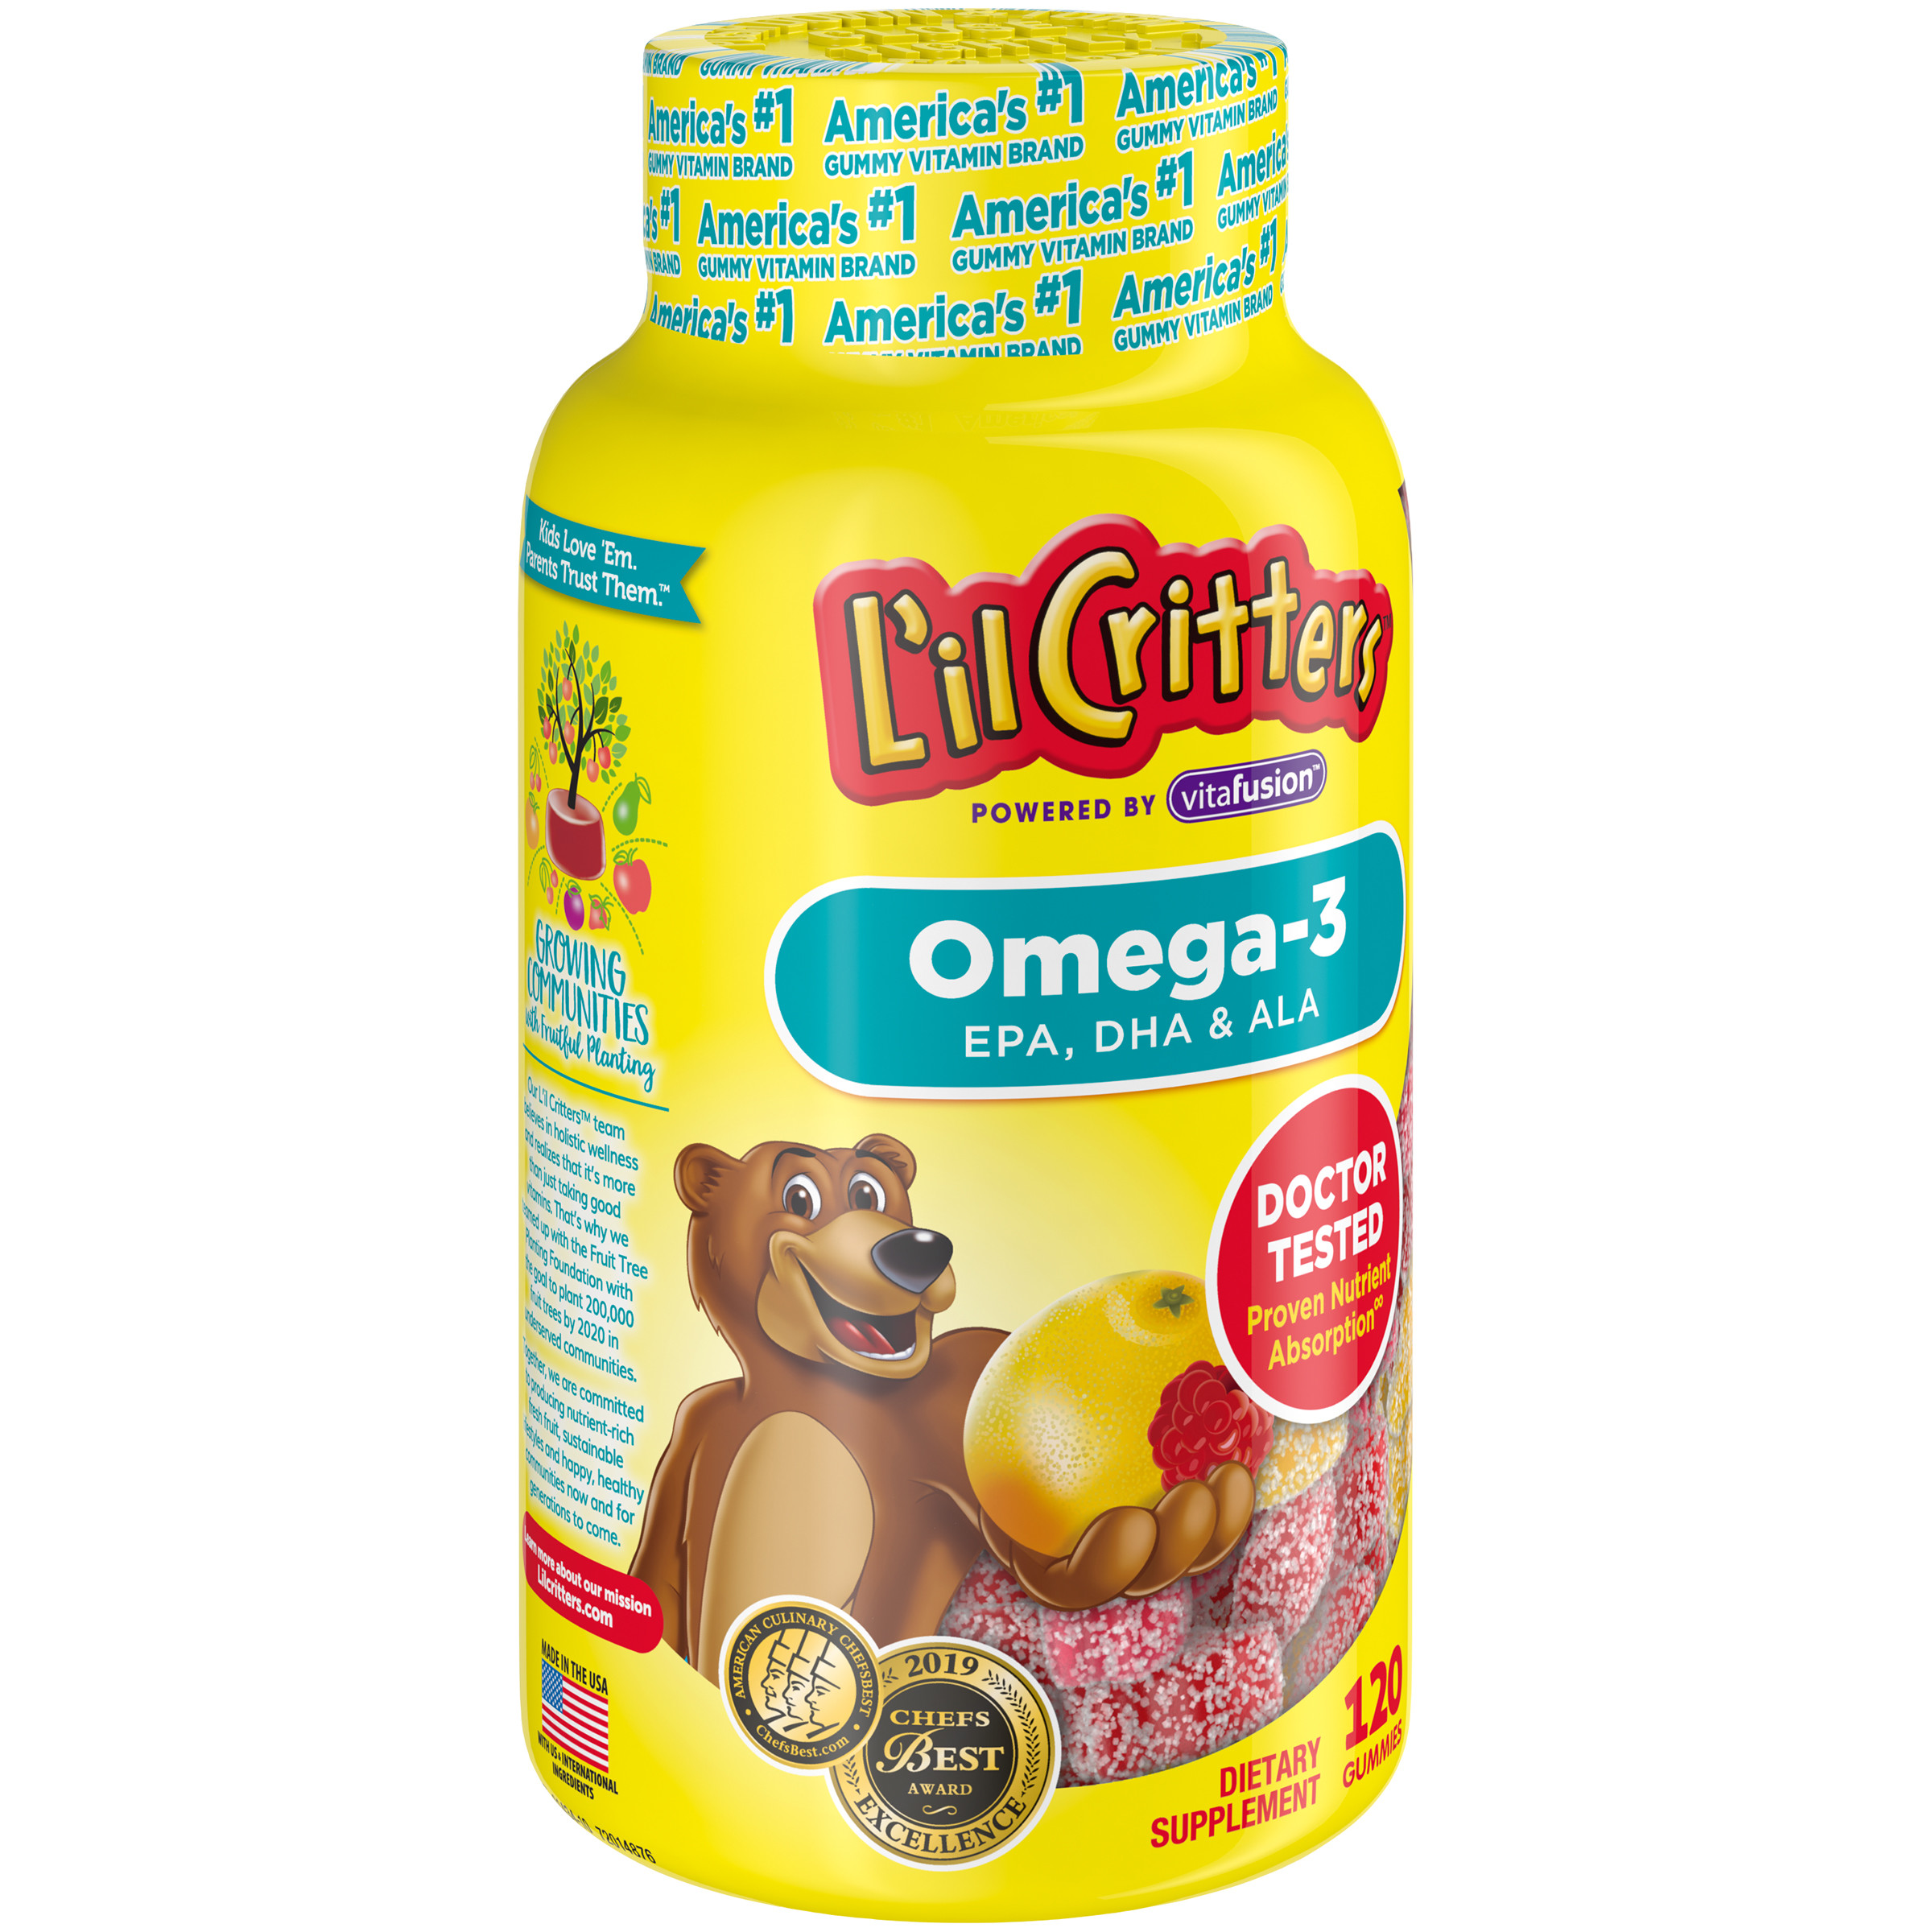 L'il Critters Kids Omega-3 Gummy, 3 Fatty Ccids, DHA, EPA and ALA. 120 ct (60-120 day Supply), Delicious Citrus Flavors - image 2 of 9